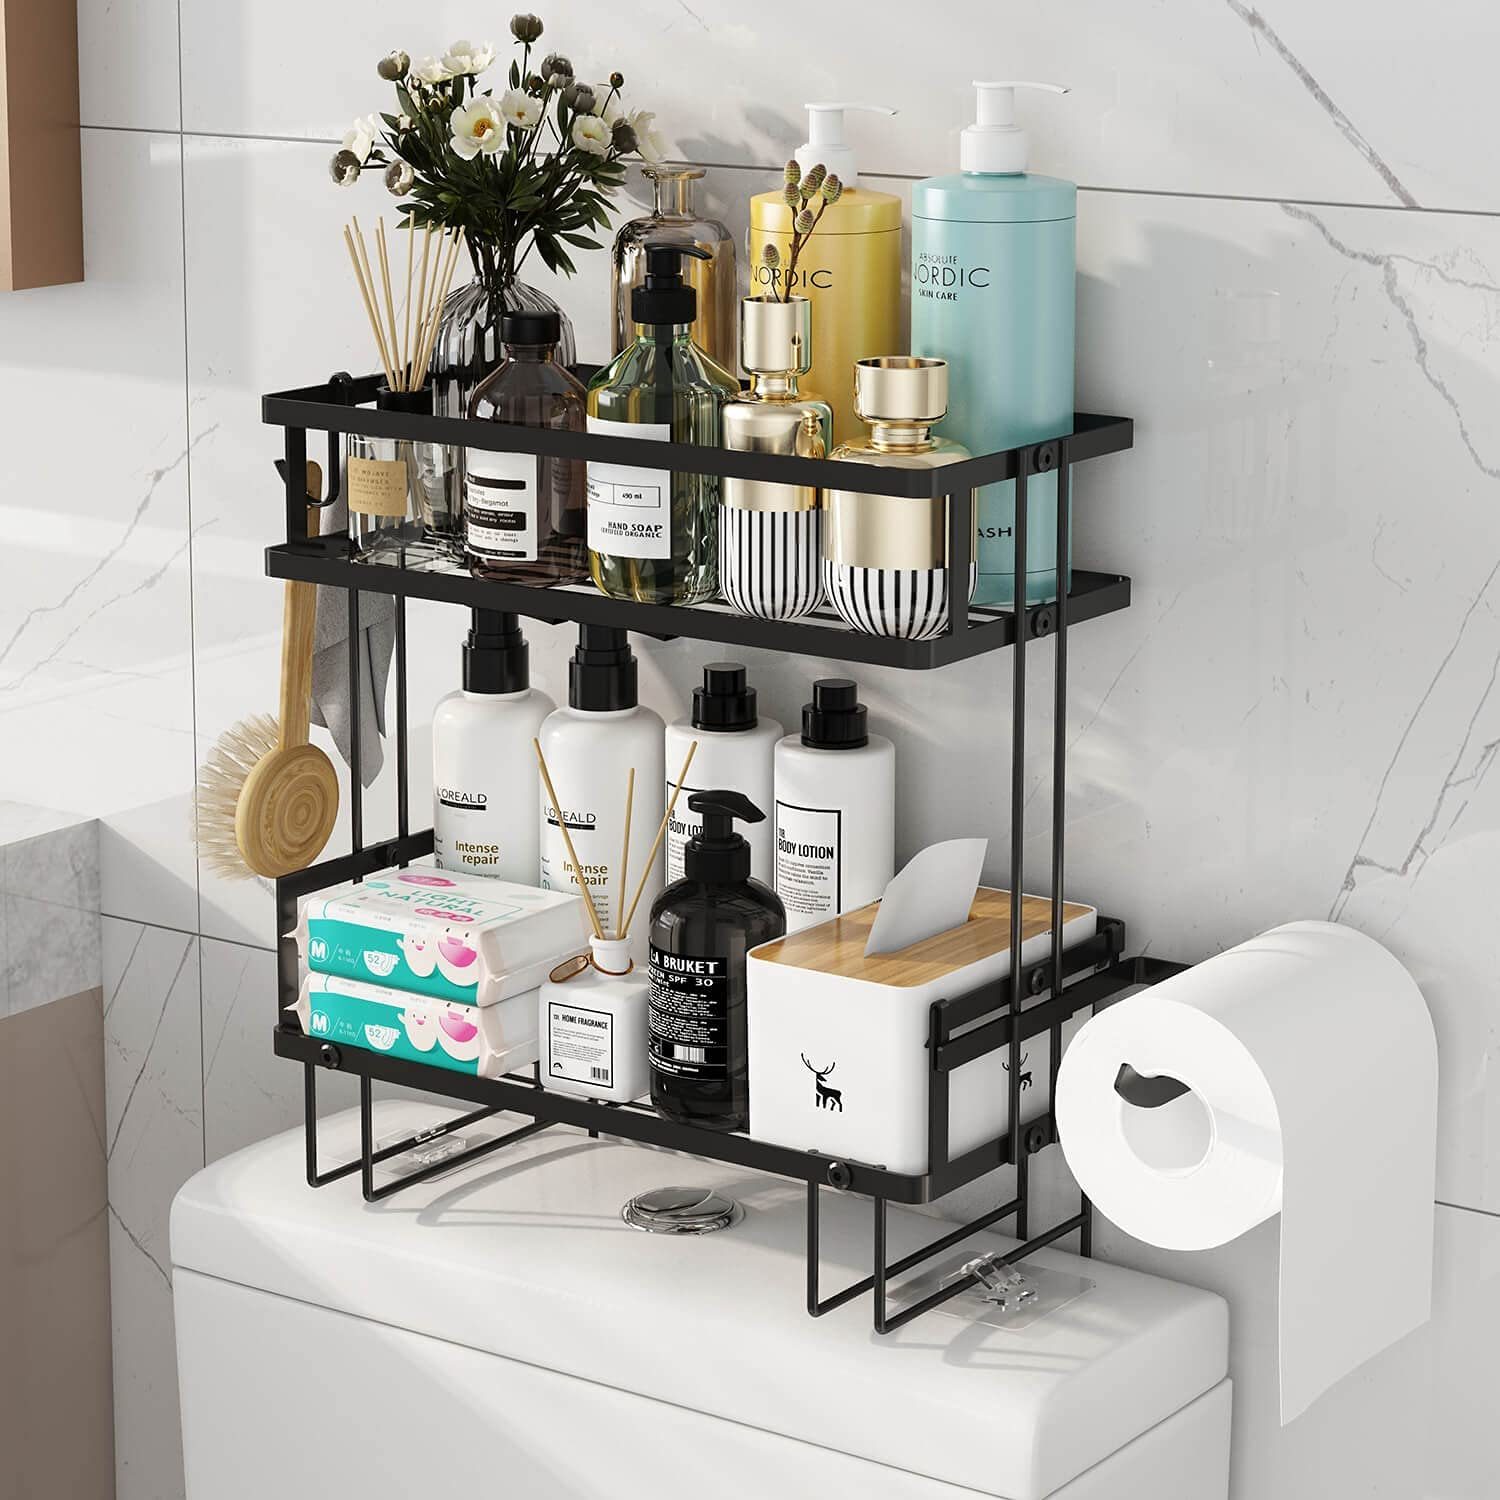 Over The Toilet Storage Rack With 2 Open Shelves And Doors, Black